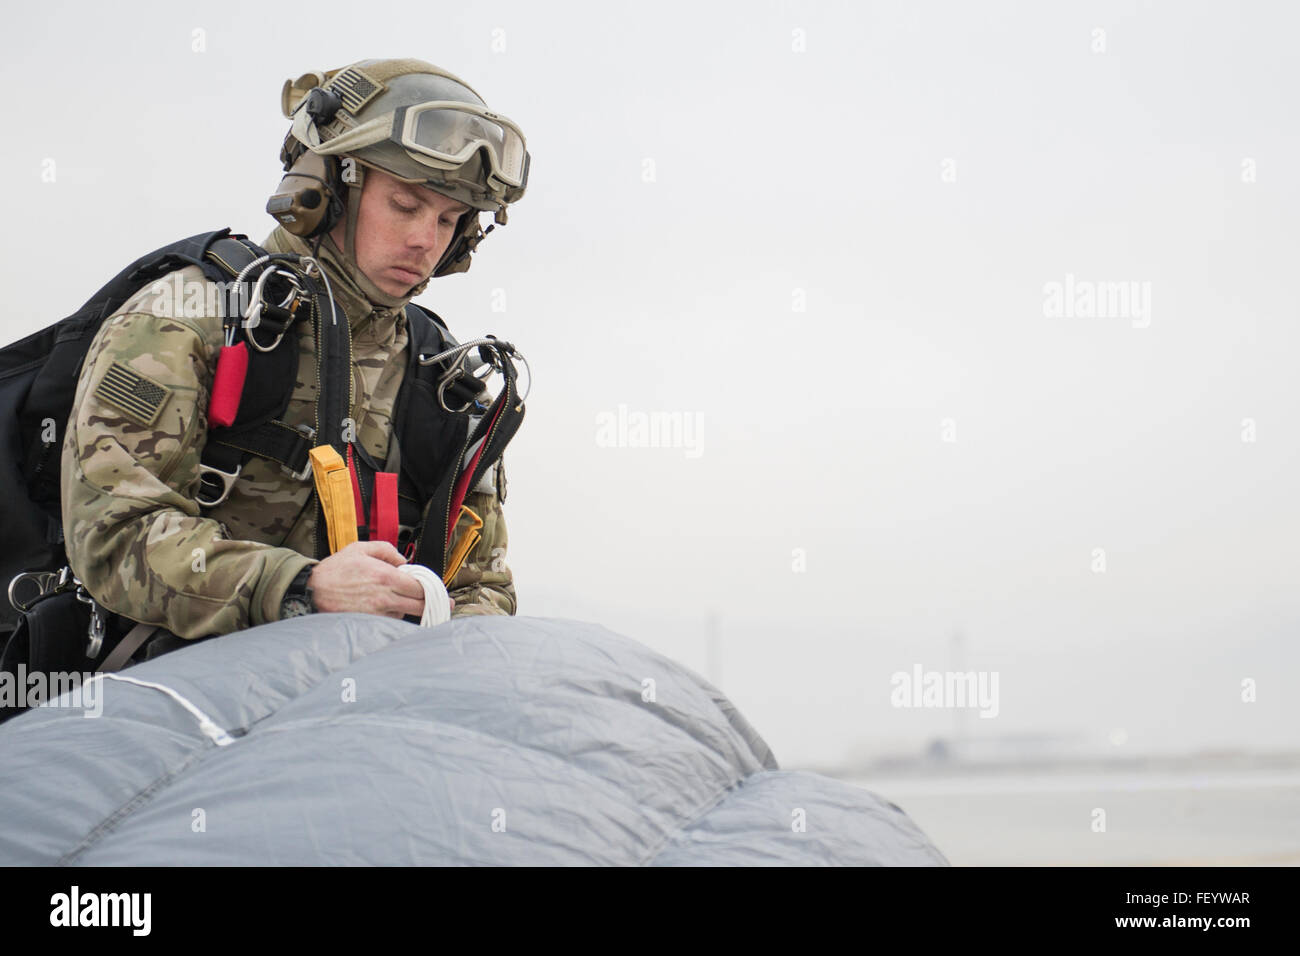 Senior Airman Josiah Stromstad, 83rd Expeditionary Rescue Squadron pararescueman, packs his parachute after jumping from an HH-60 Pave Hawk over Bagram Air Field, Afghanistan, Nov. 22, 2015. The team jumps to maintain proficiency and train for their mission in support of Operation Freedom's Sentinel. ( Tech. Sgt. Robert Cloys/Released) Stock Photo